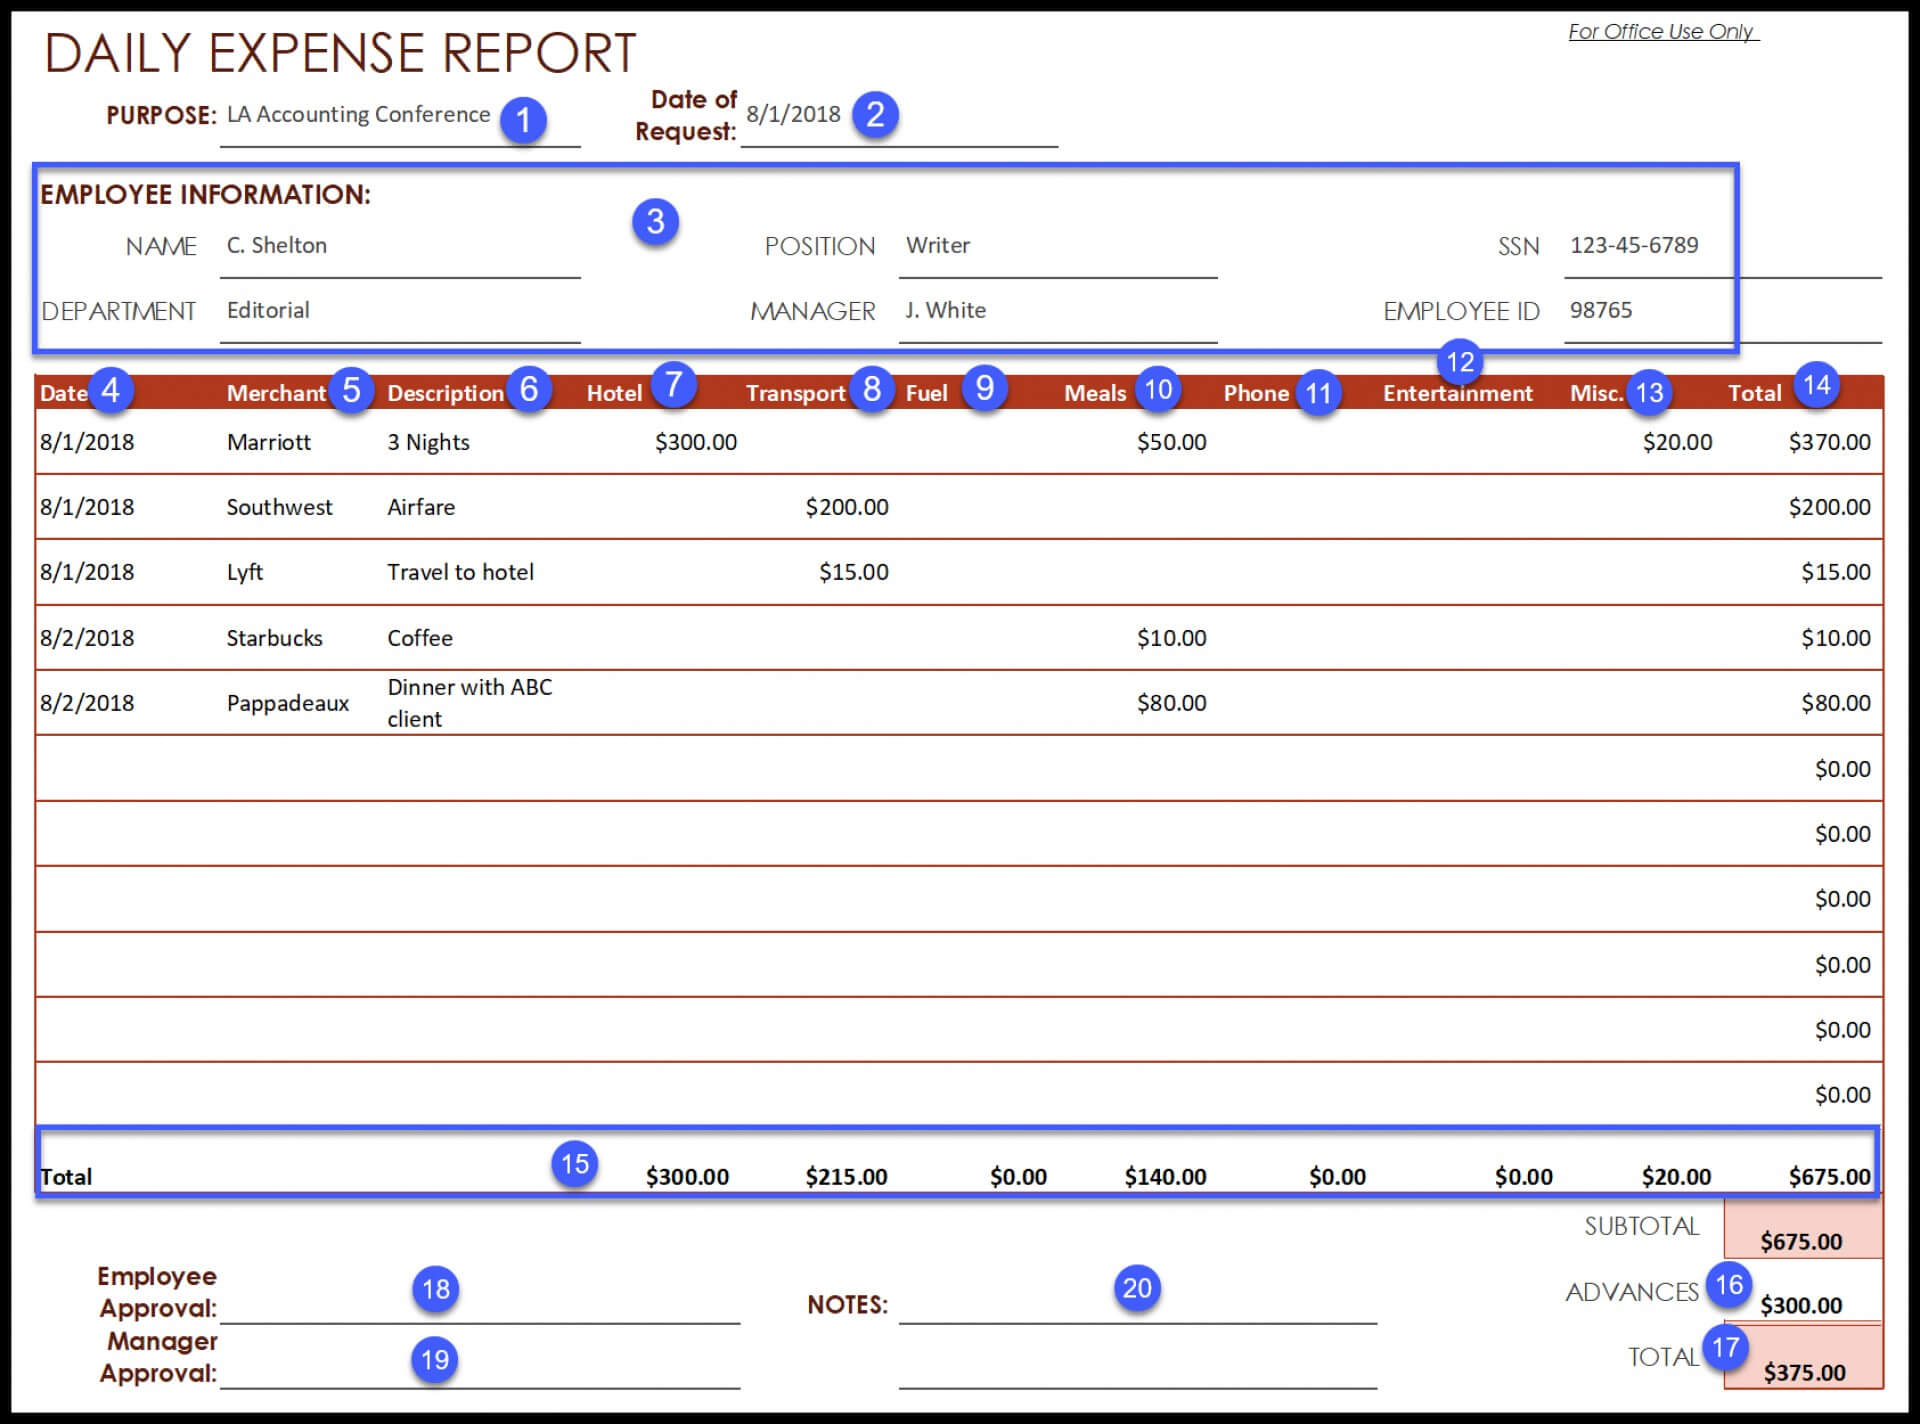 039 Expense Report Templates Excel Template Ideas Accounts Intended For Accounts Receivable Report Template